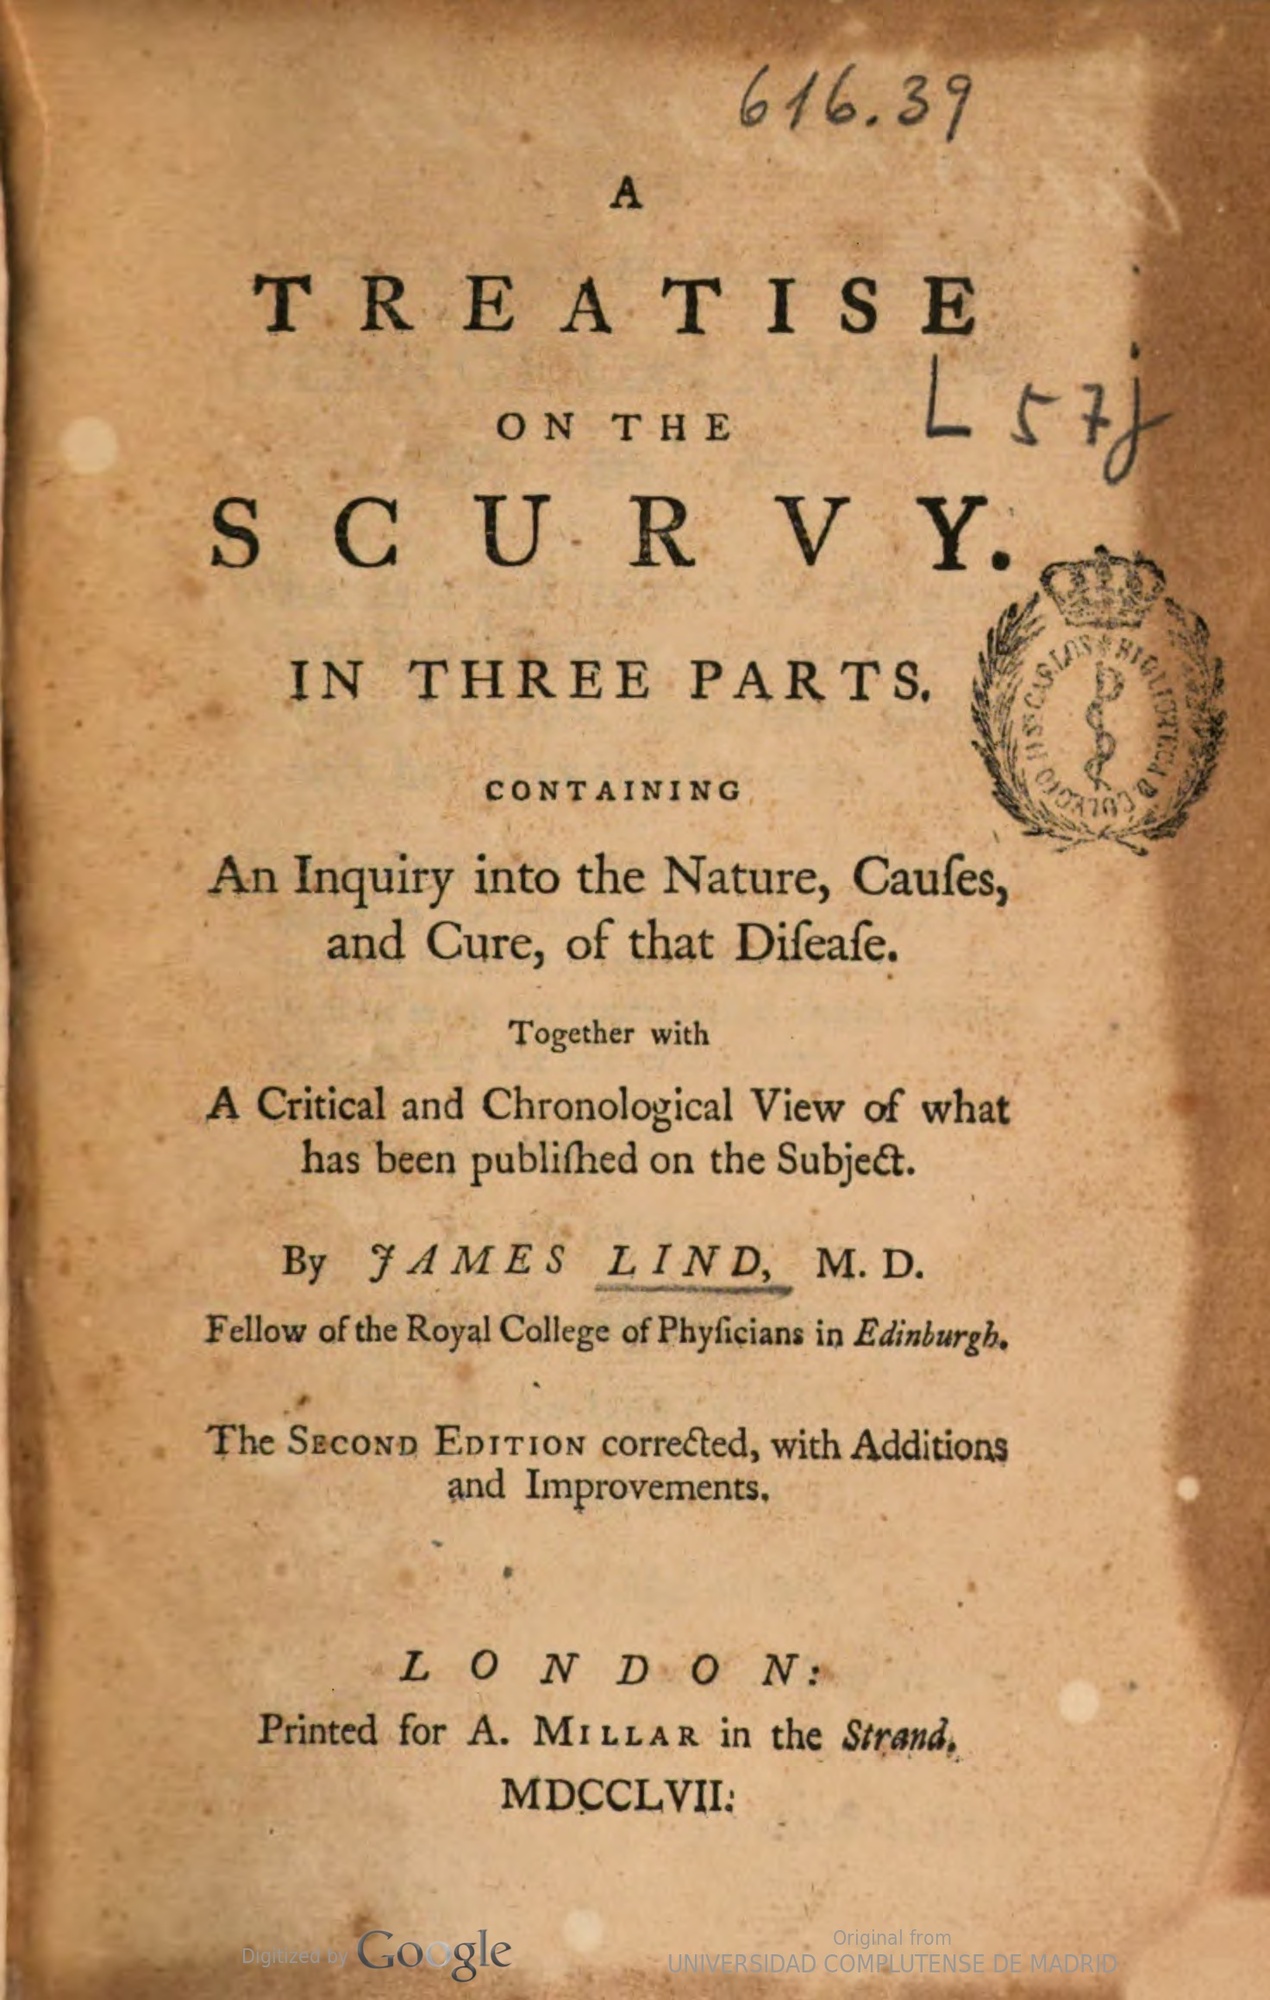 Title page for A Treatise on the Scurvy